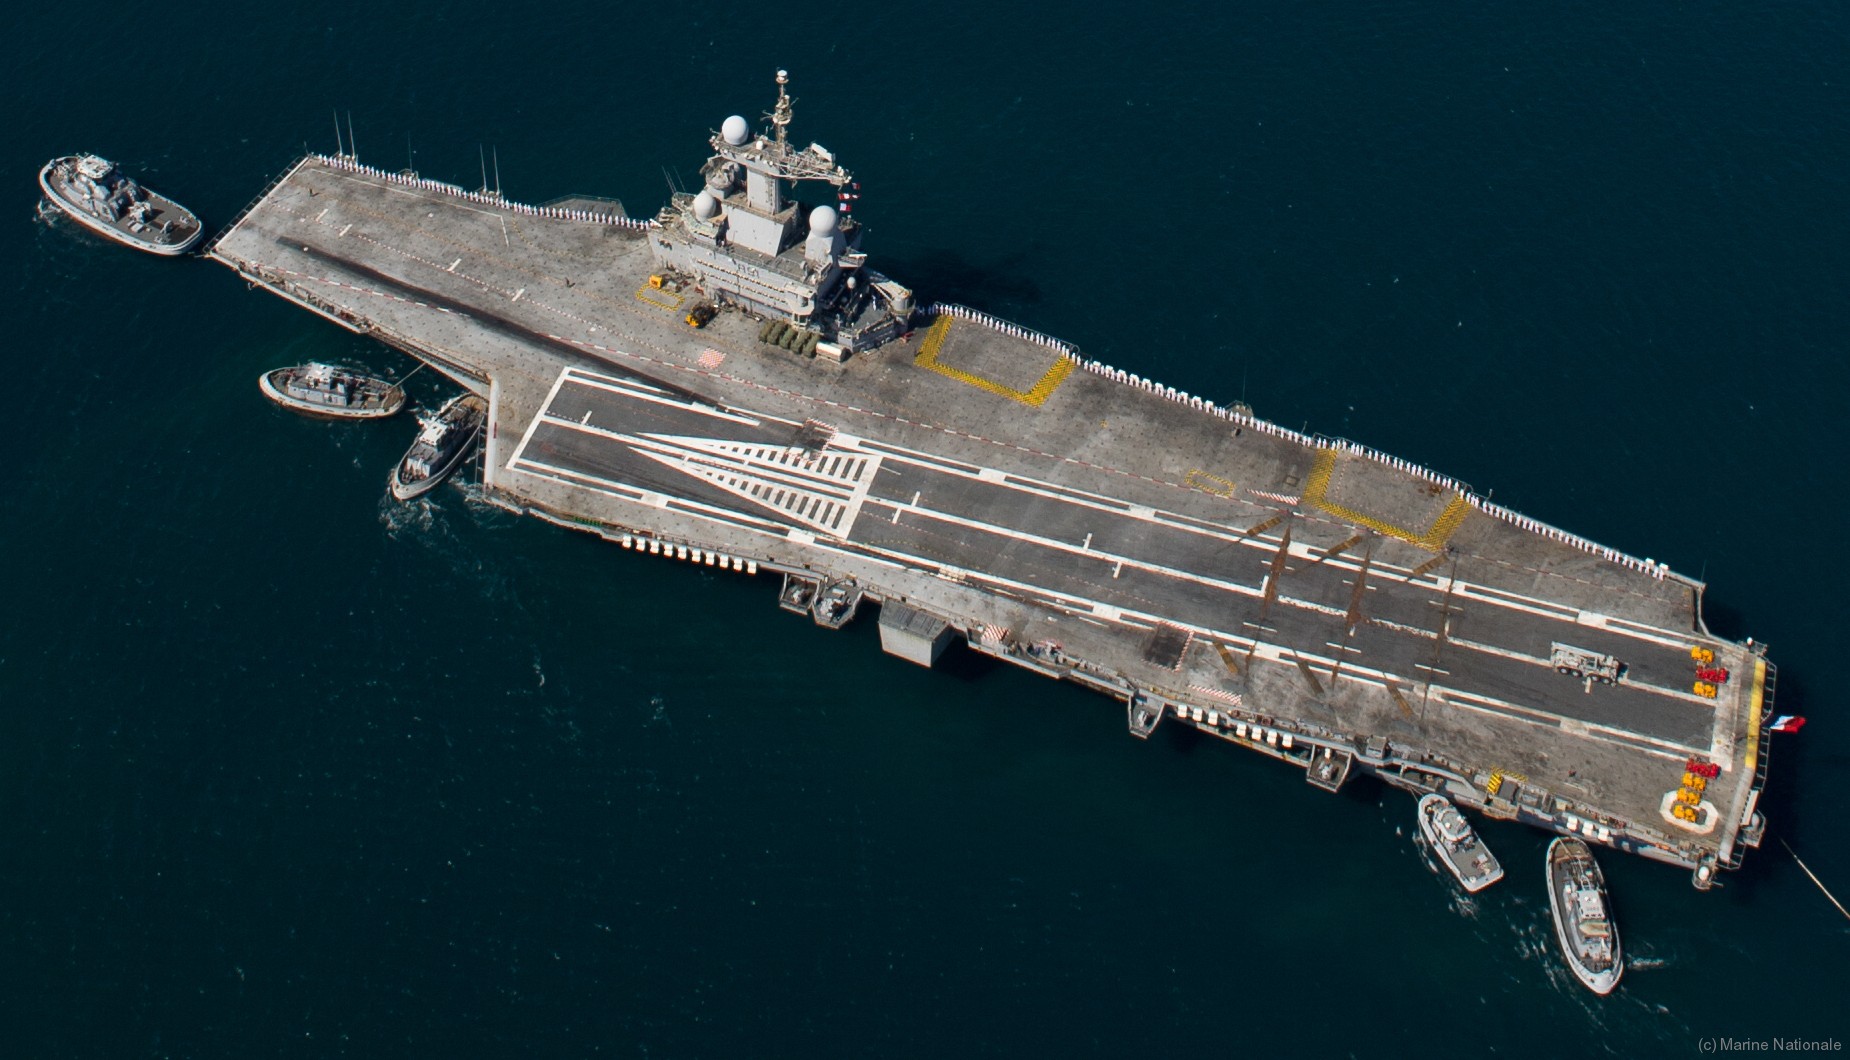  r-91 fs charles de gaulle aircraft carrier french navy 38